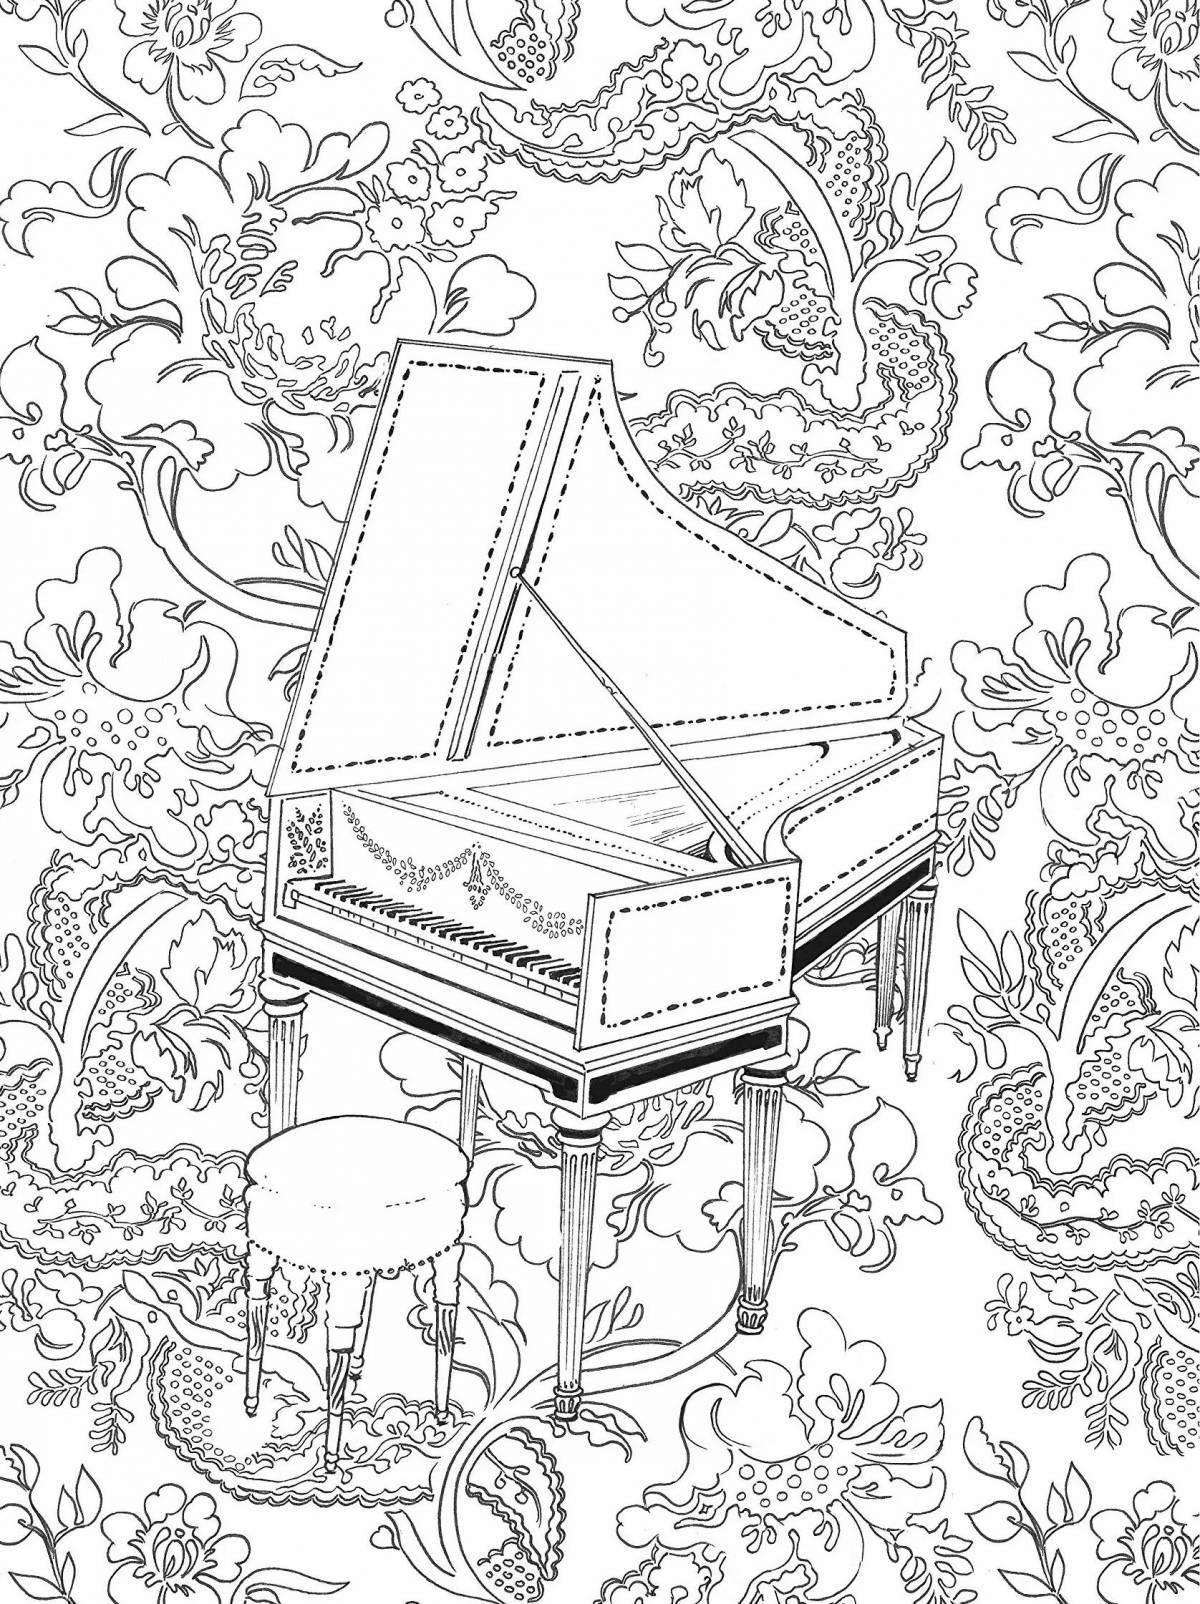 Tempting coloring page melody